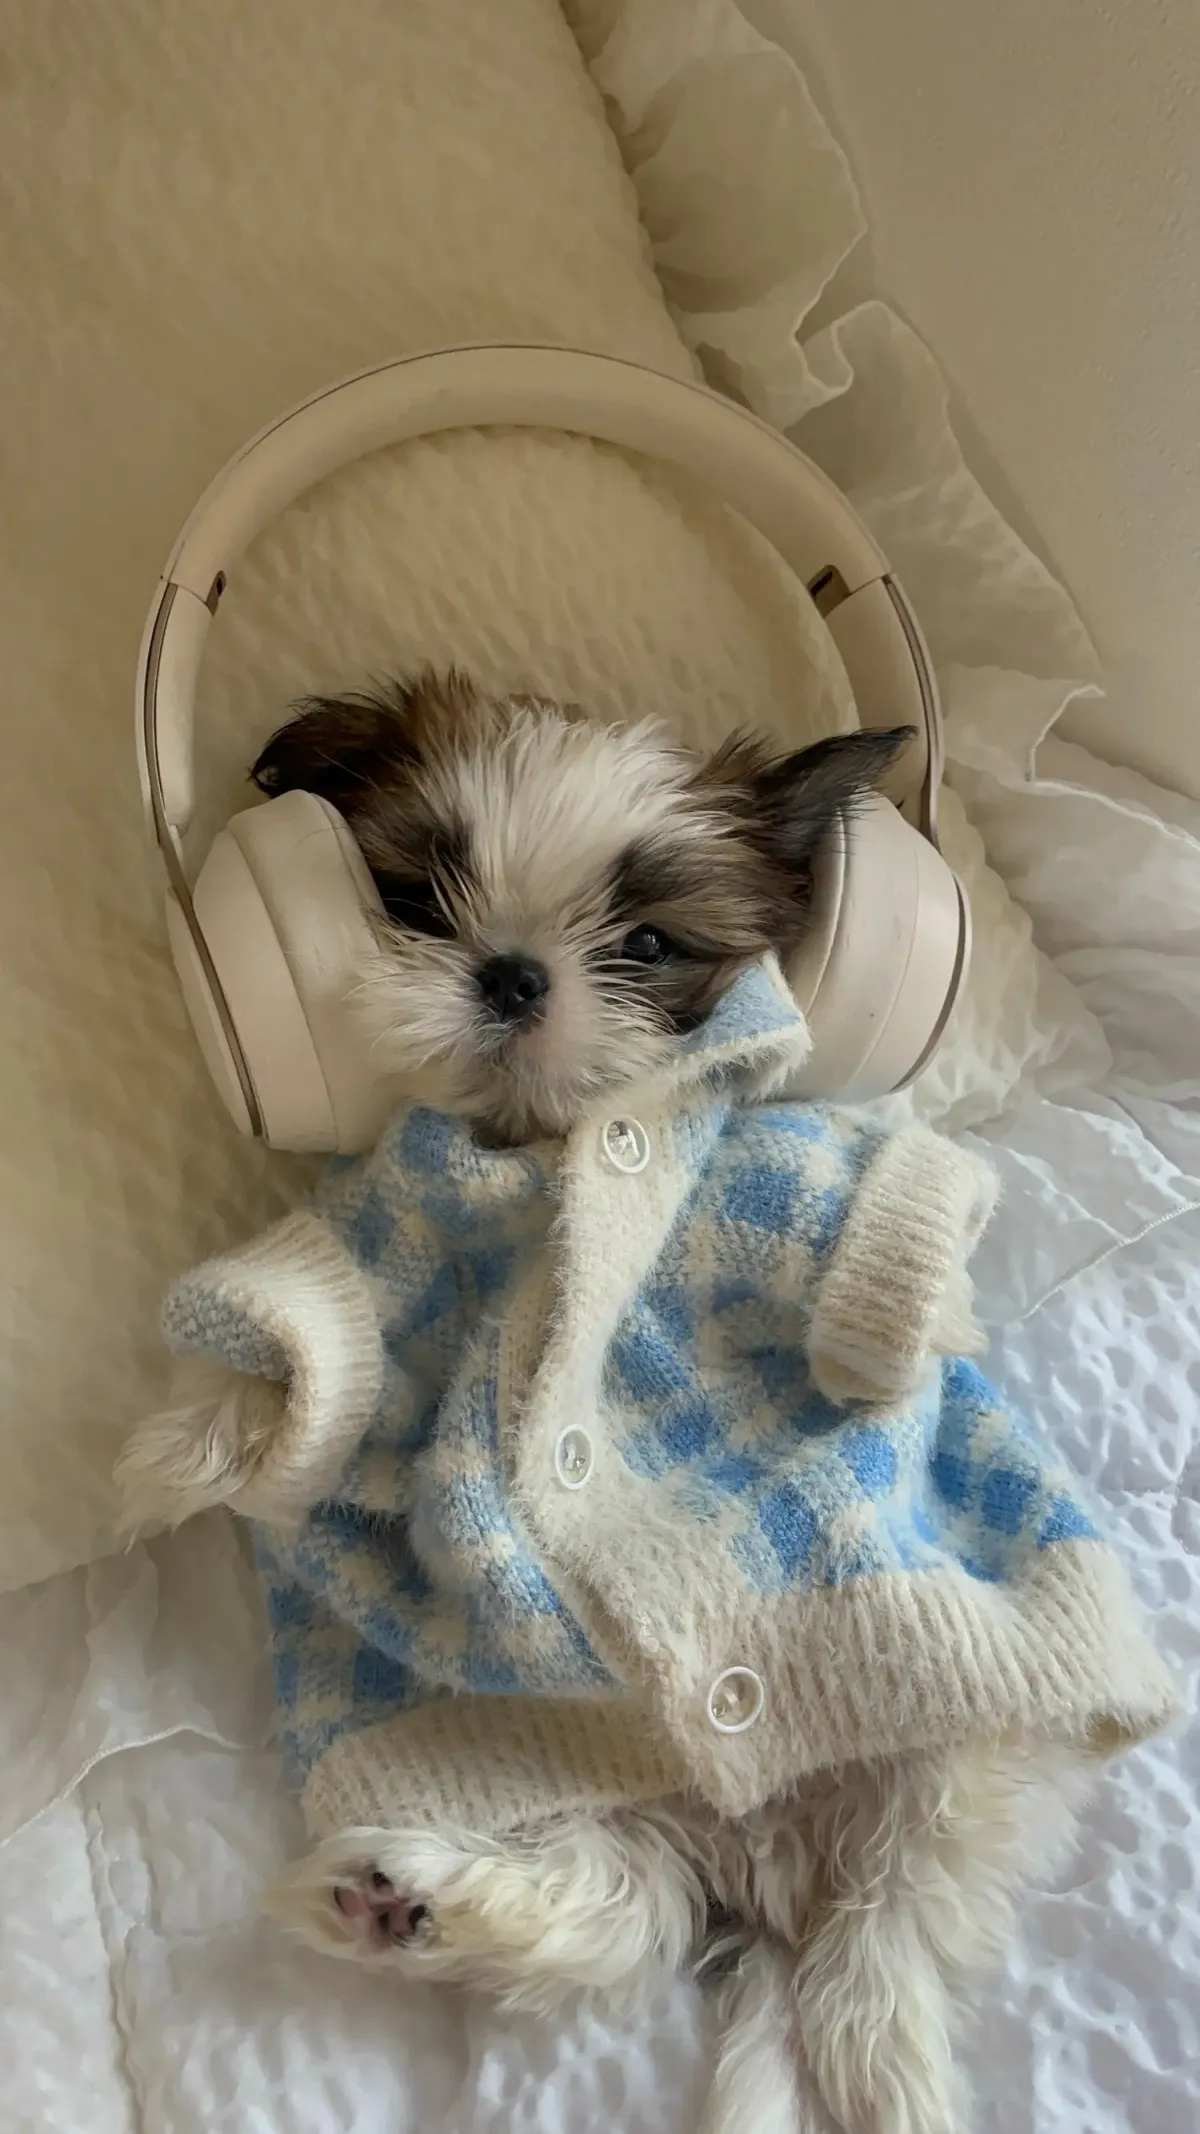 The Secret to a Tranquil Tail-Wagger? Introducing Dog Noise-Canceling Headphones